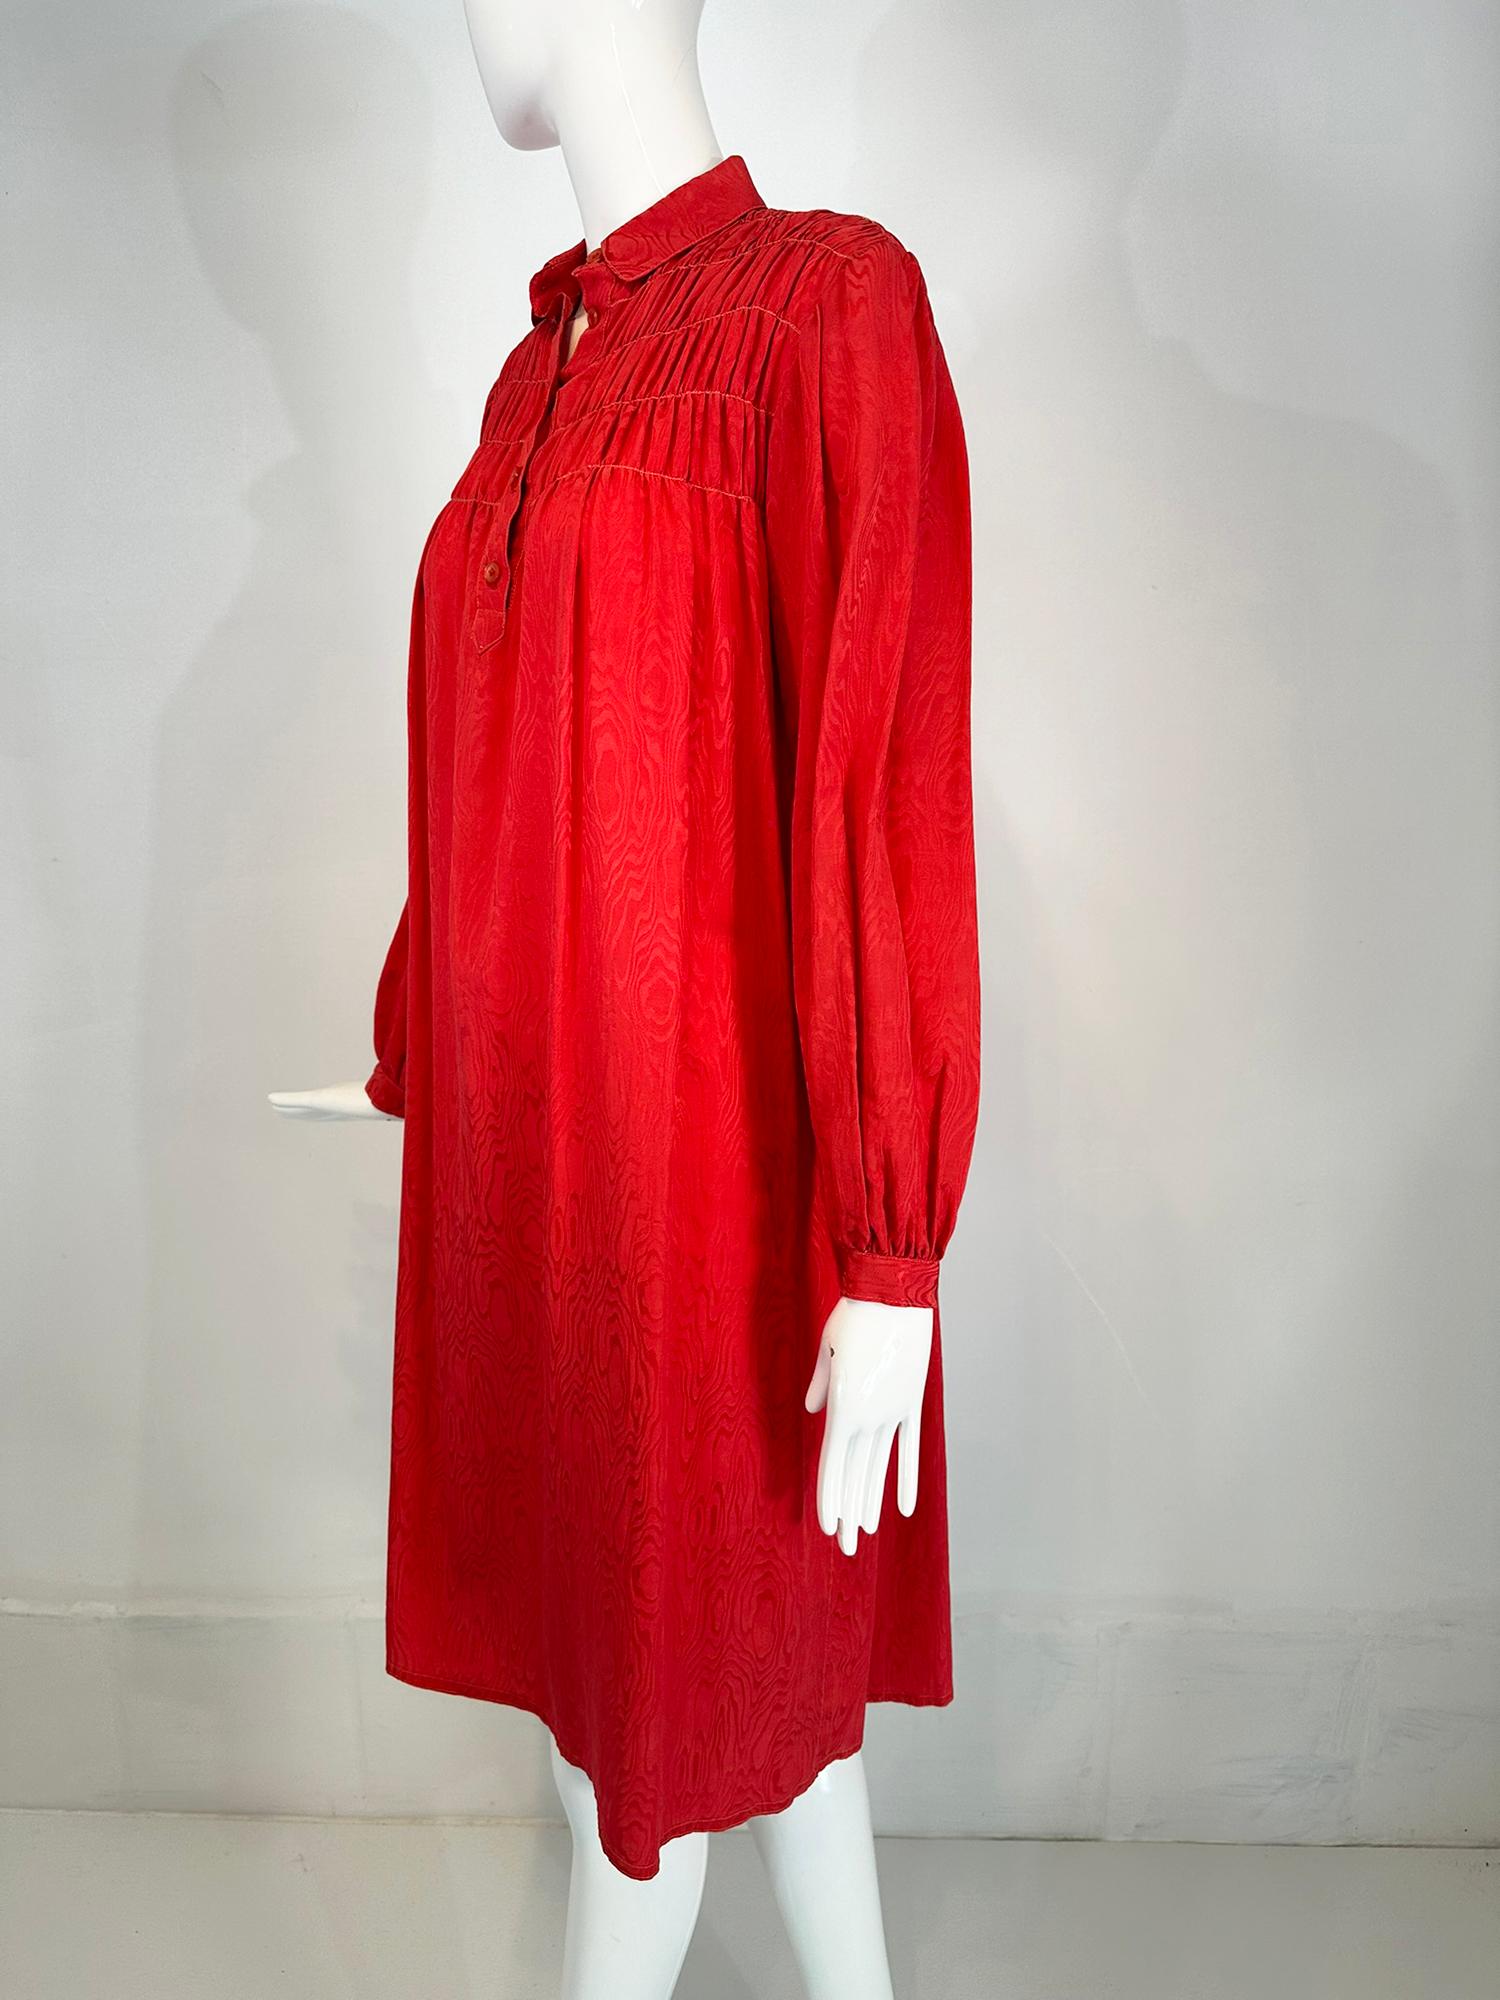 Geoffrey Beene Coral Red Silk Jacquard Smock Dress 1970s In Good Condition For Sale In West Palm Beach, FL